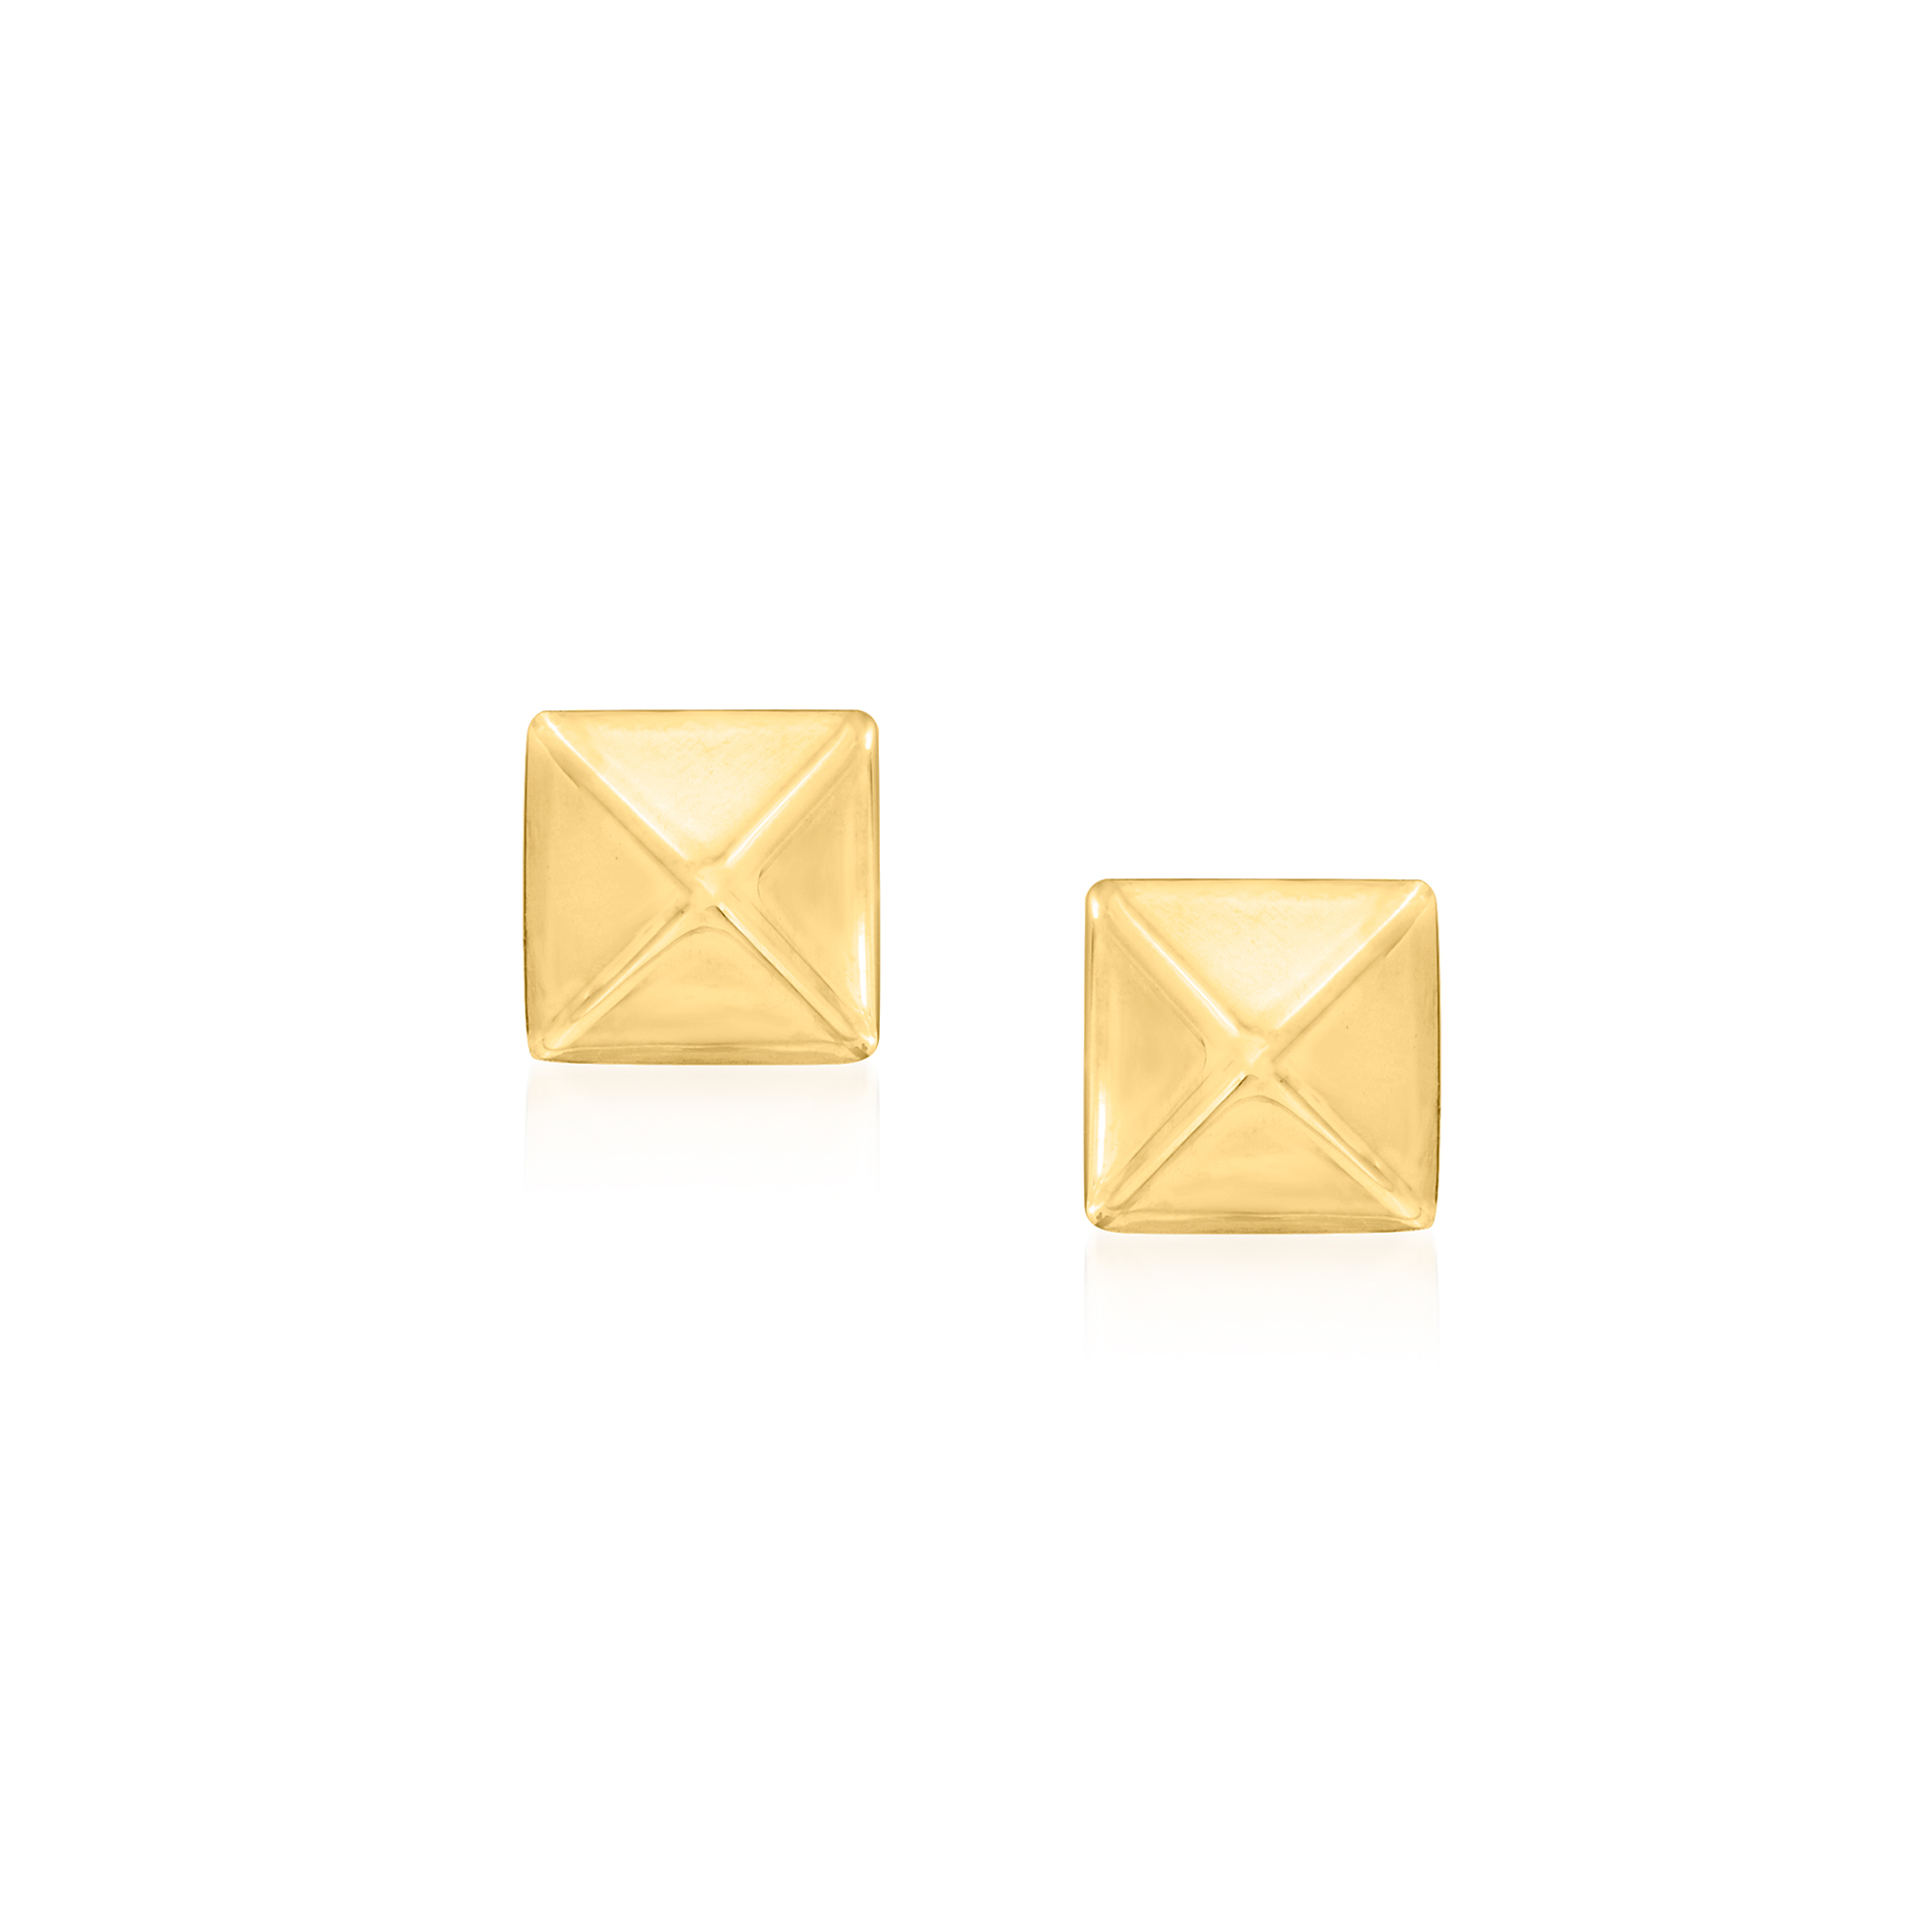 6mm 14kt Yellow Gold Pyramid Stud Earrings  RossSimons